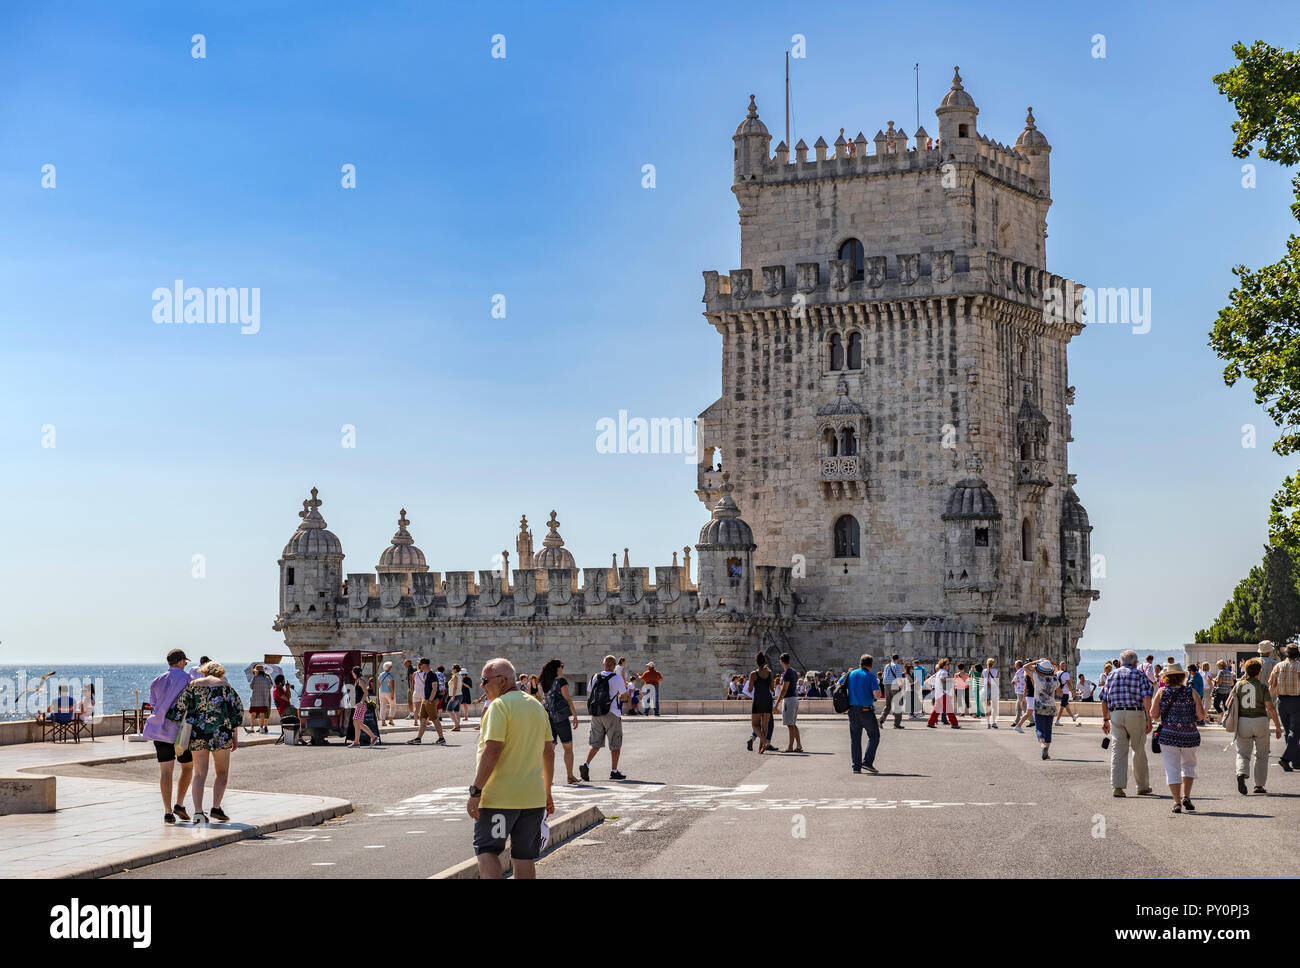 The Belem tower on the banks of the Tagus river Lisbon Portugay Stock Photo